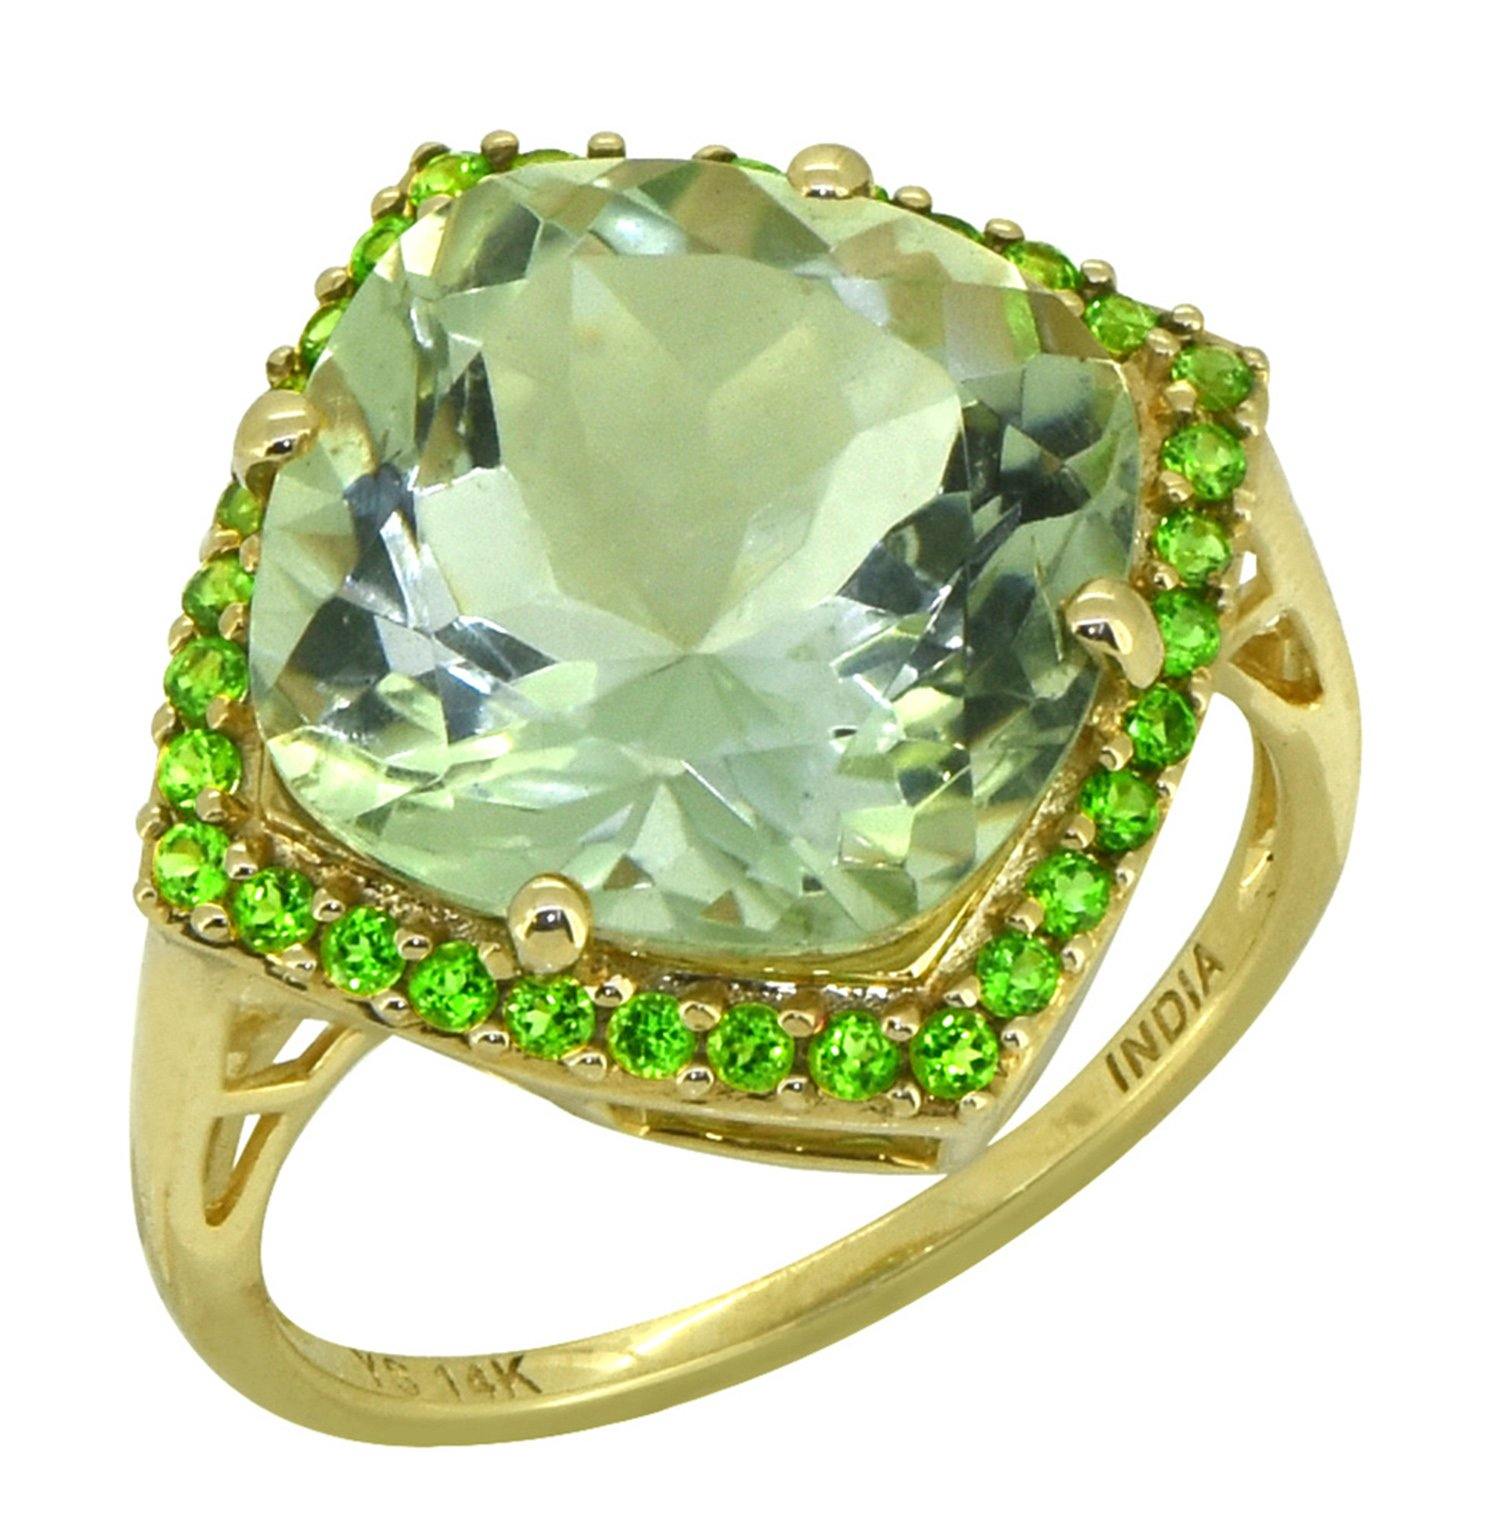 7.18 Ct Green Amethyst Chrome Diopside Solid 14k Yellow Gold Ring Jewelry - YoTreasure